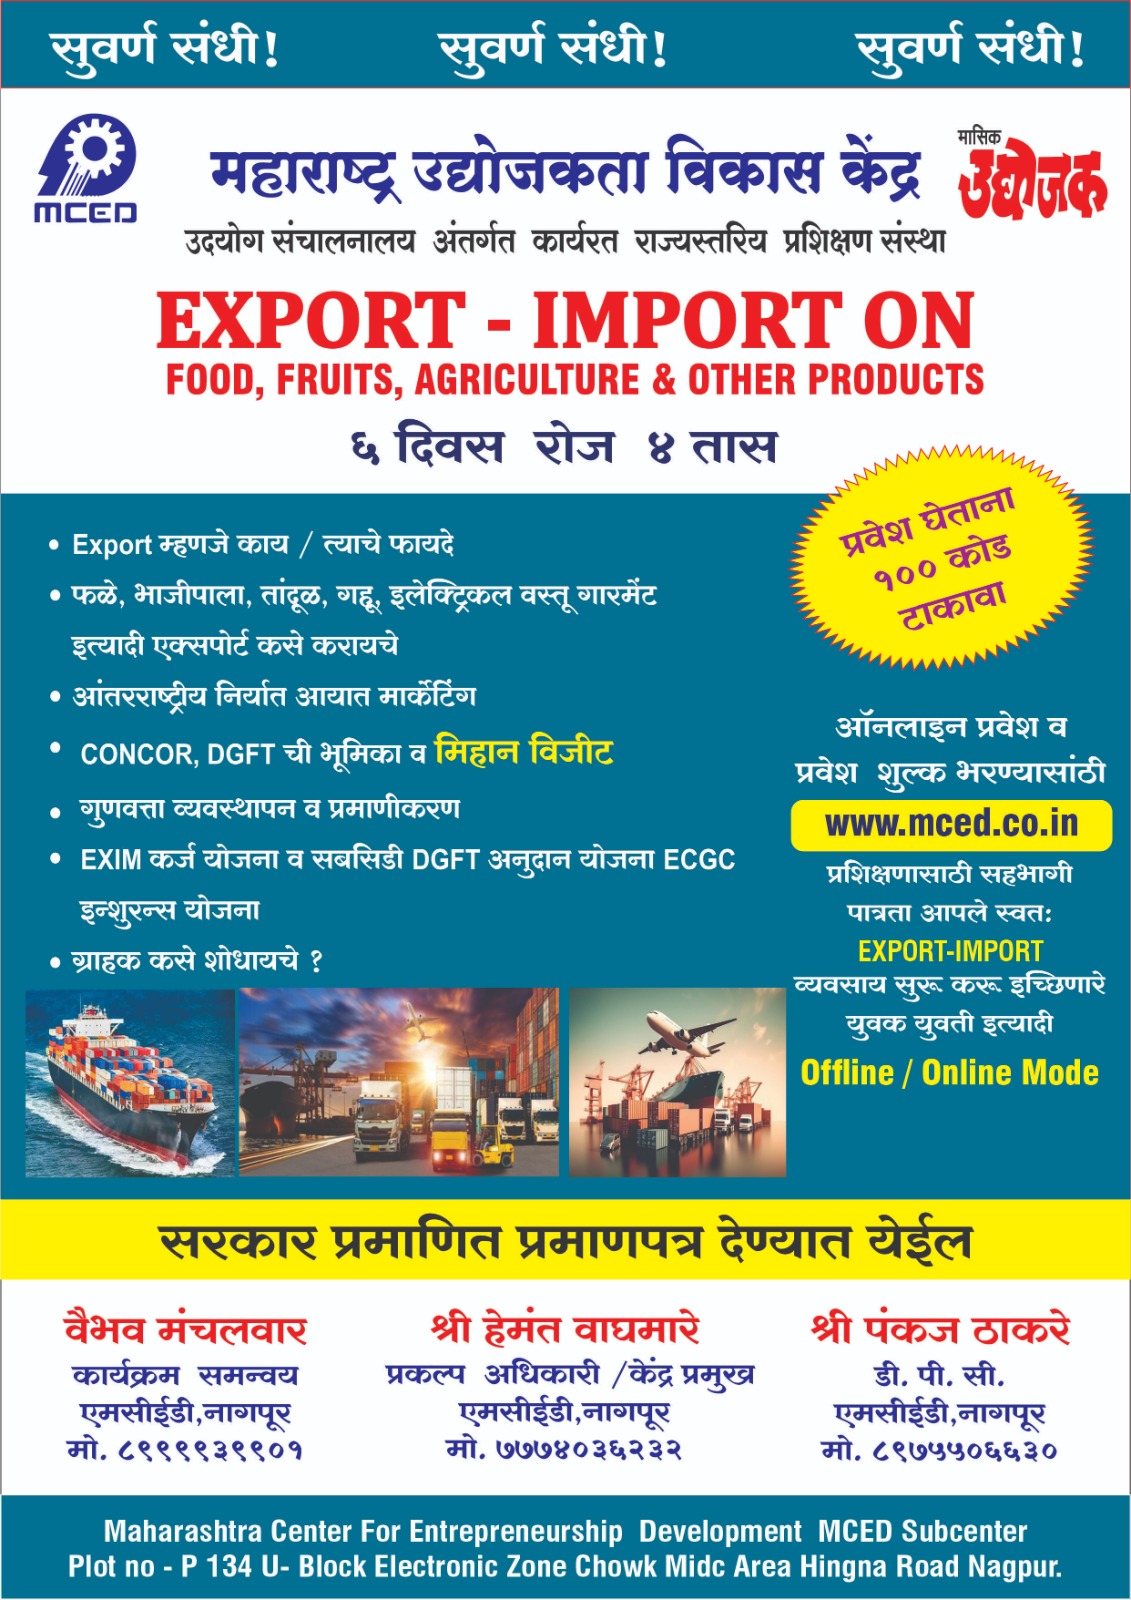 Export-Import on Food, Fruits, Agriculture & Other products export